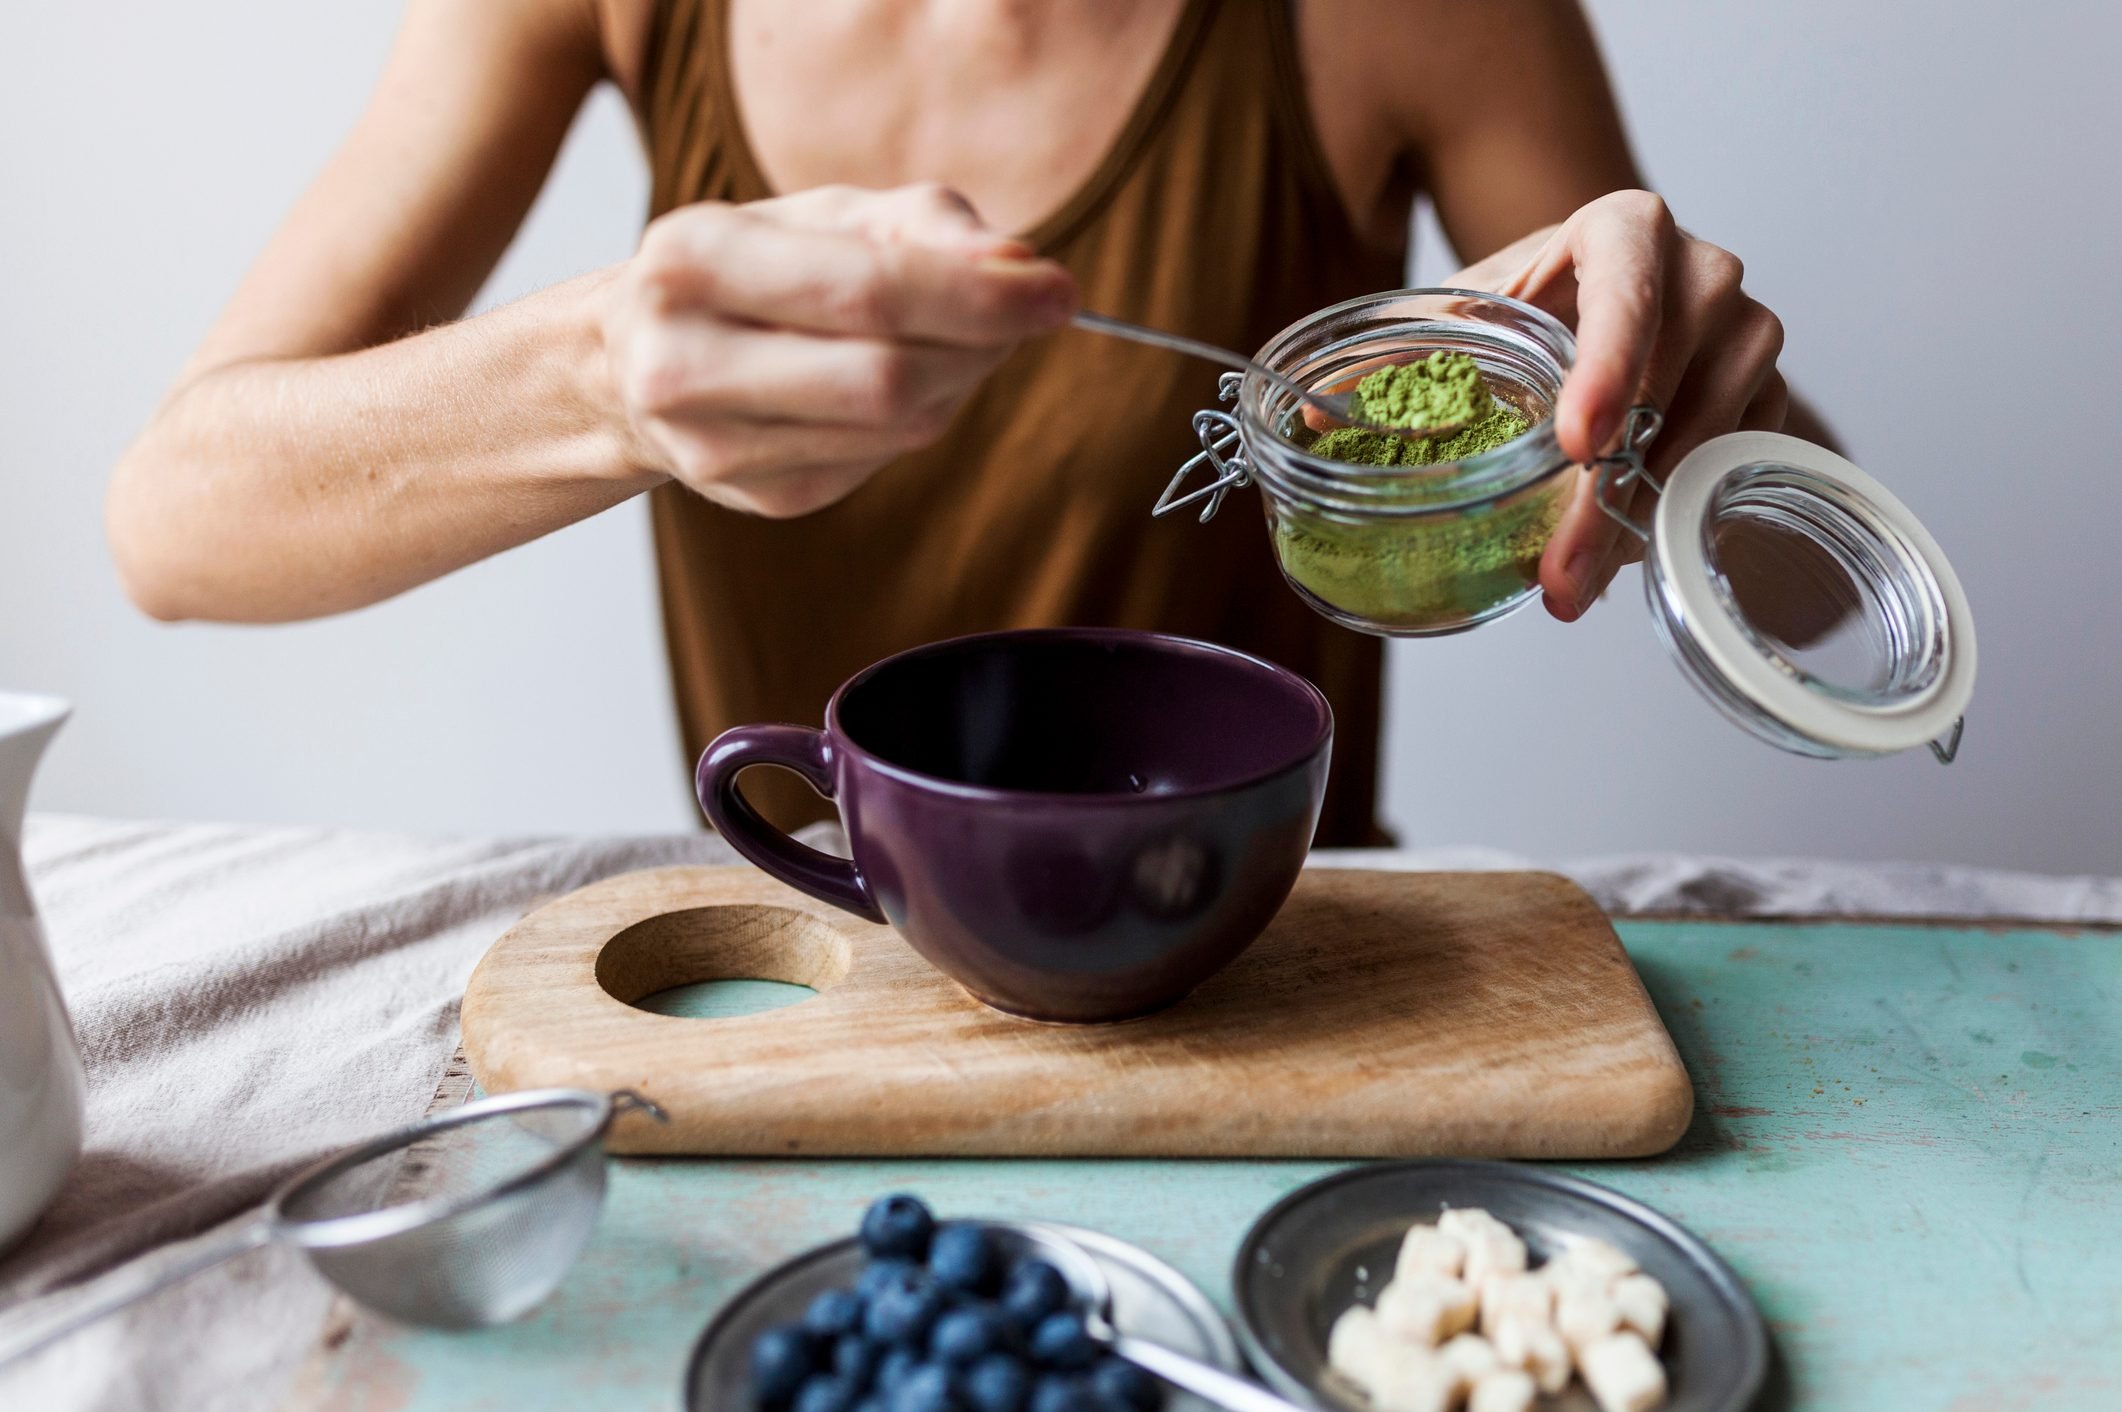 Does Matcha Have Caffeine? What to Know About Matcha's Caffeine Content